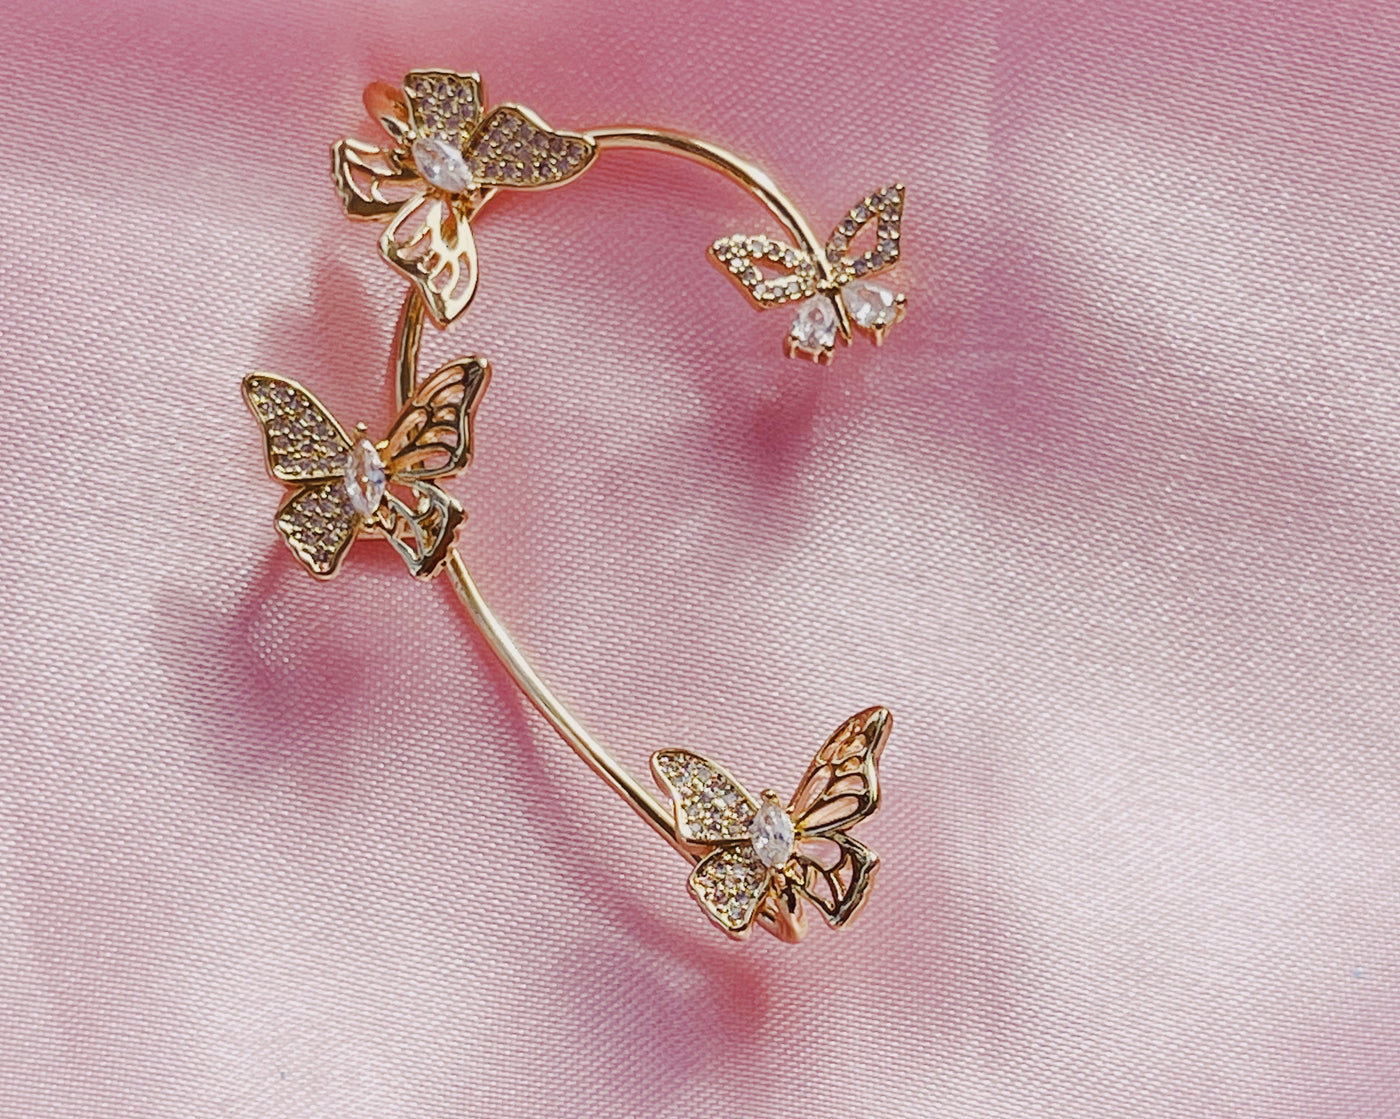 Butterfly around earring and cuff